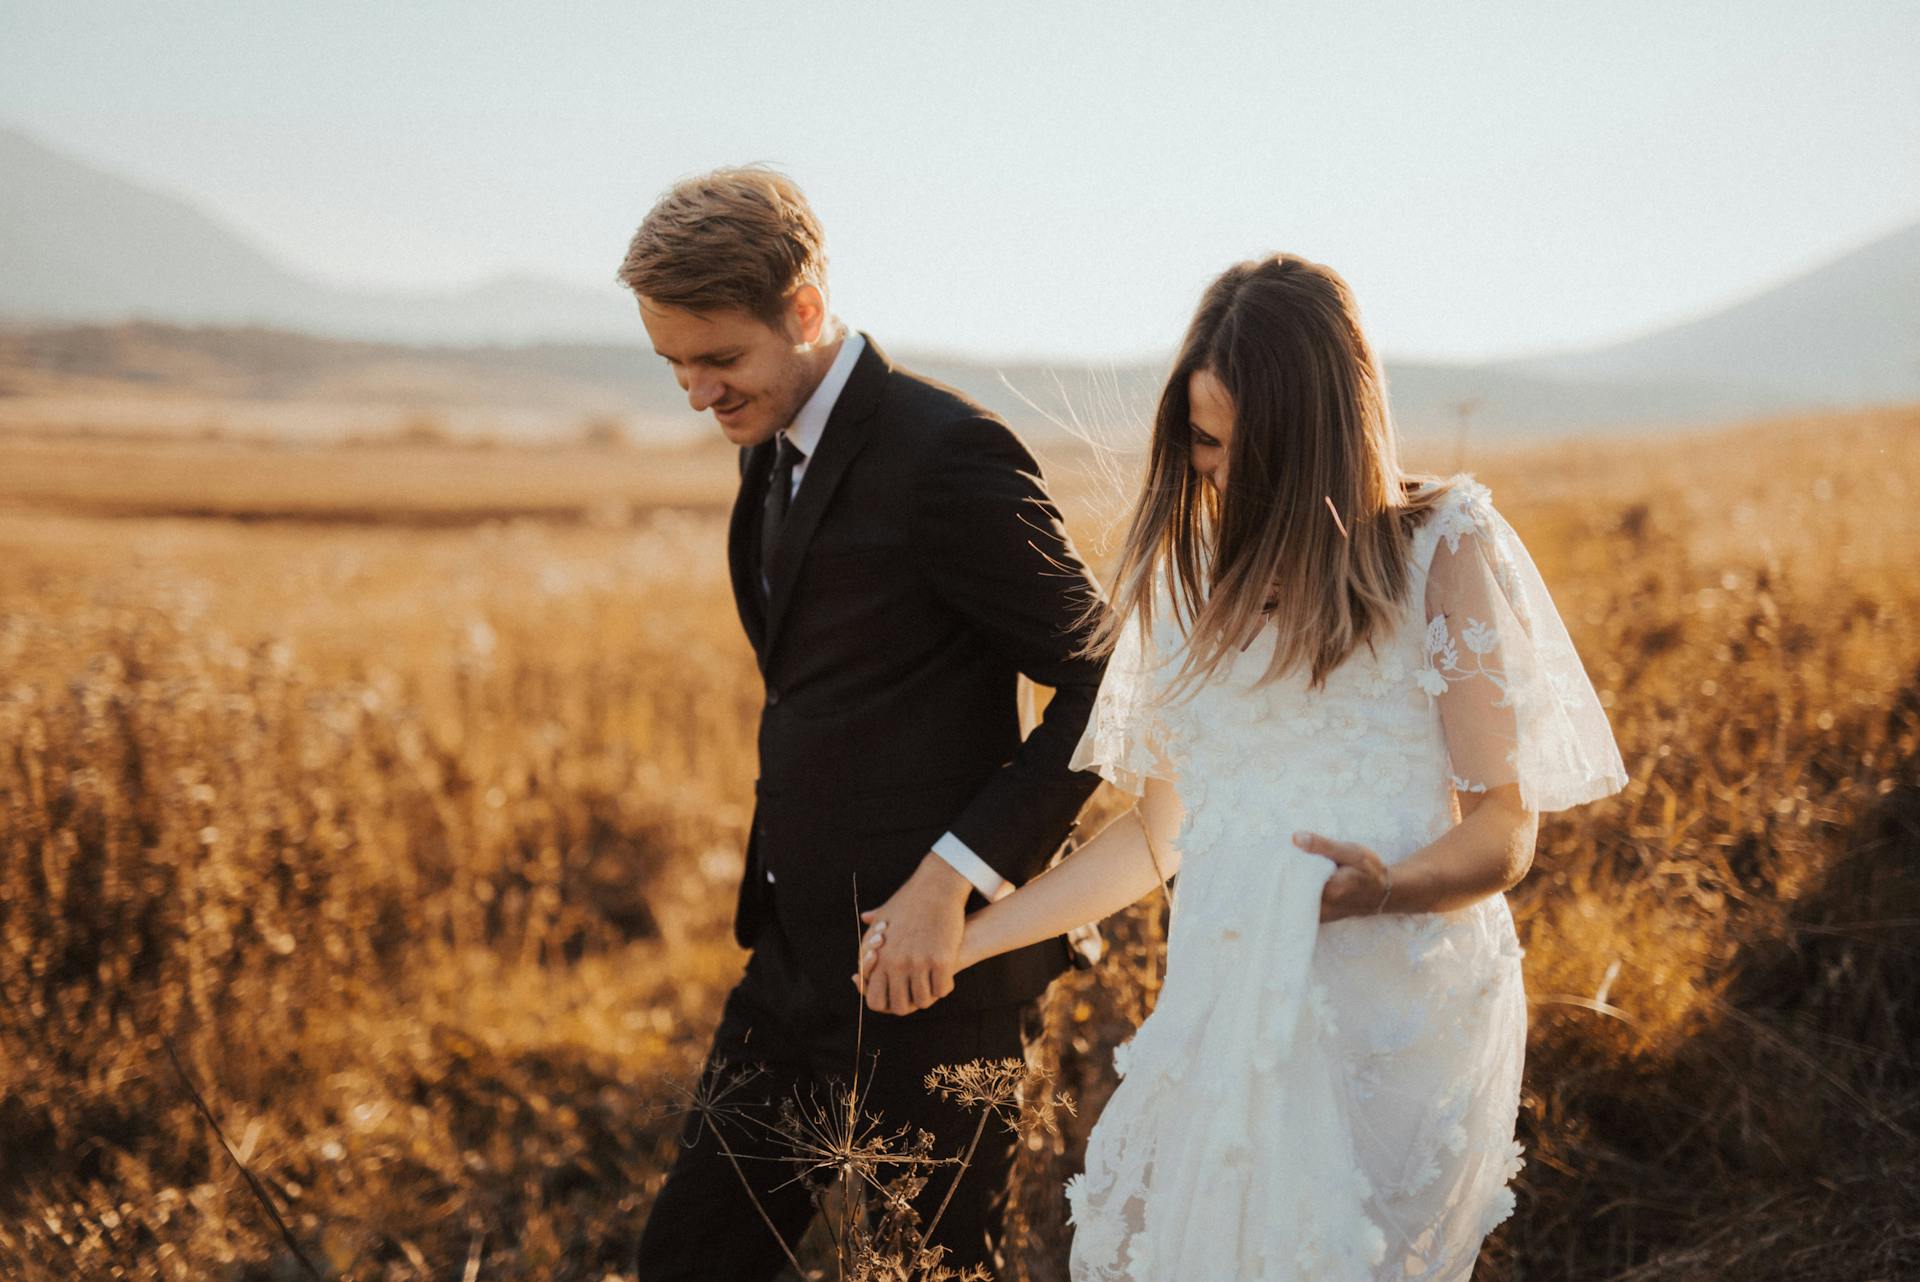 A married couple | Source: Pexels